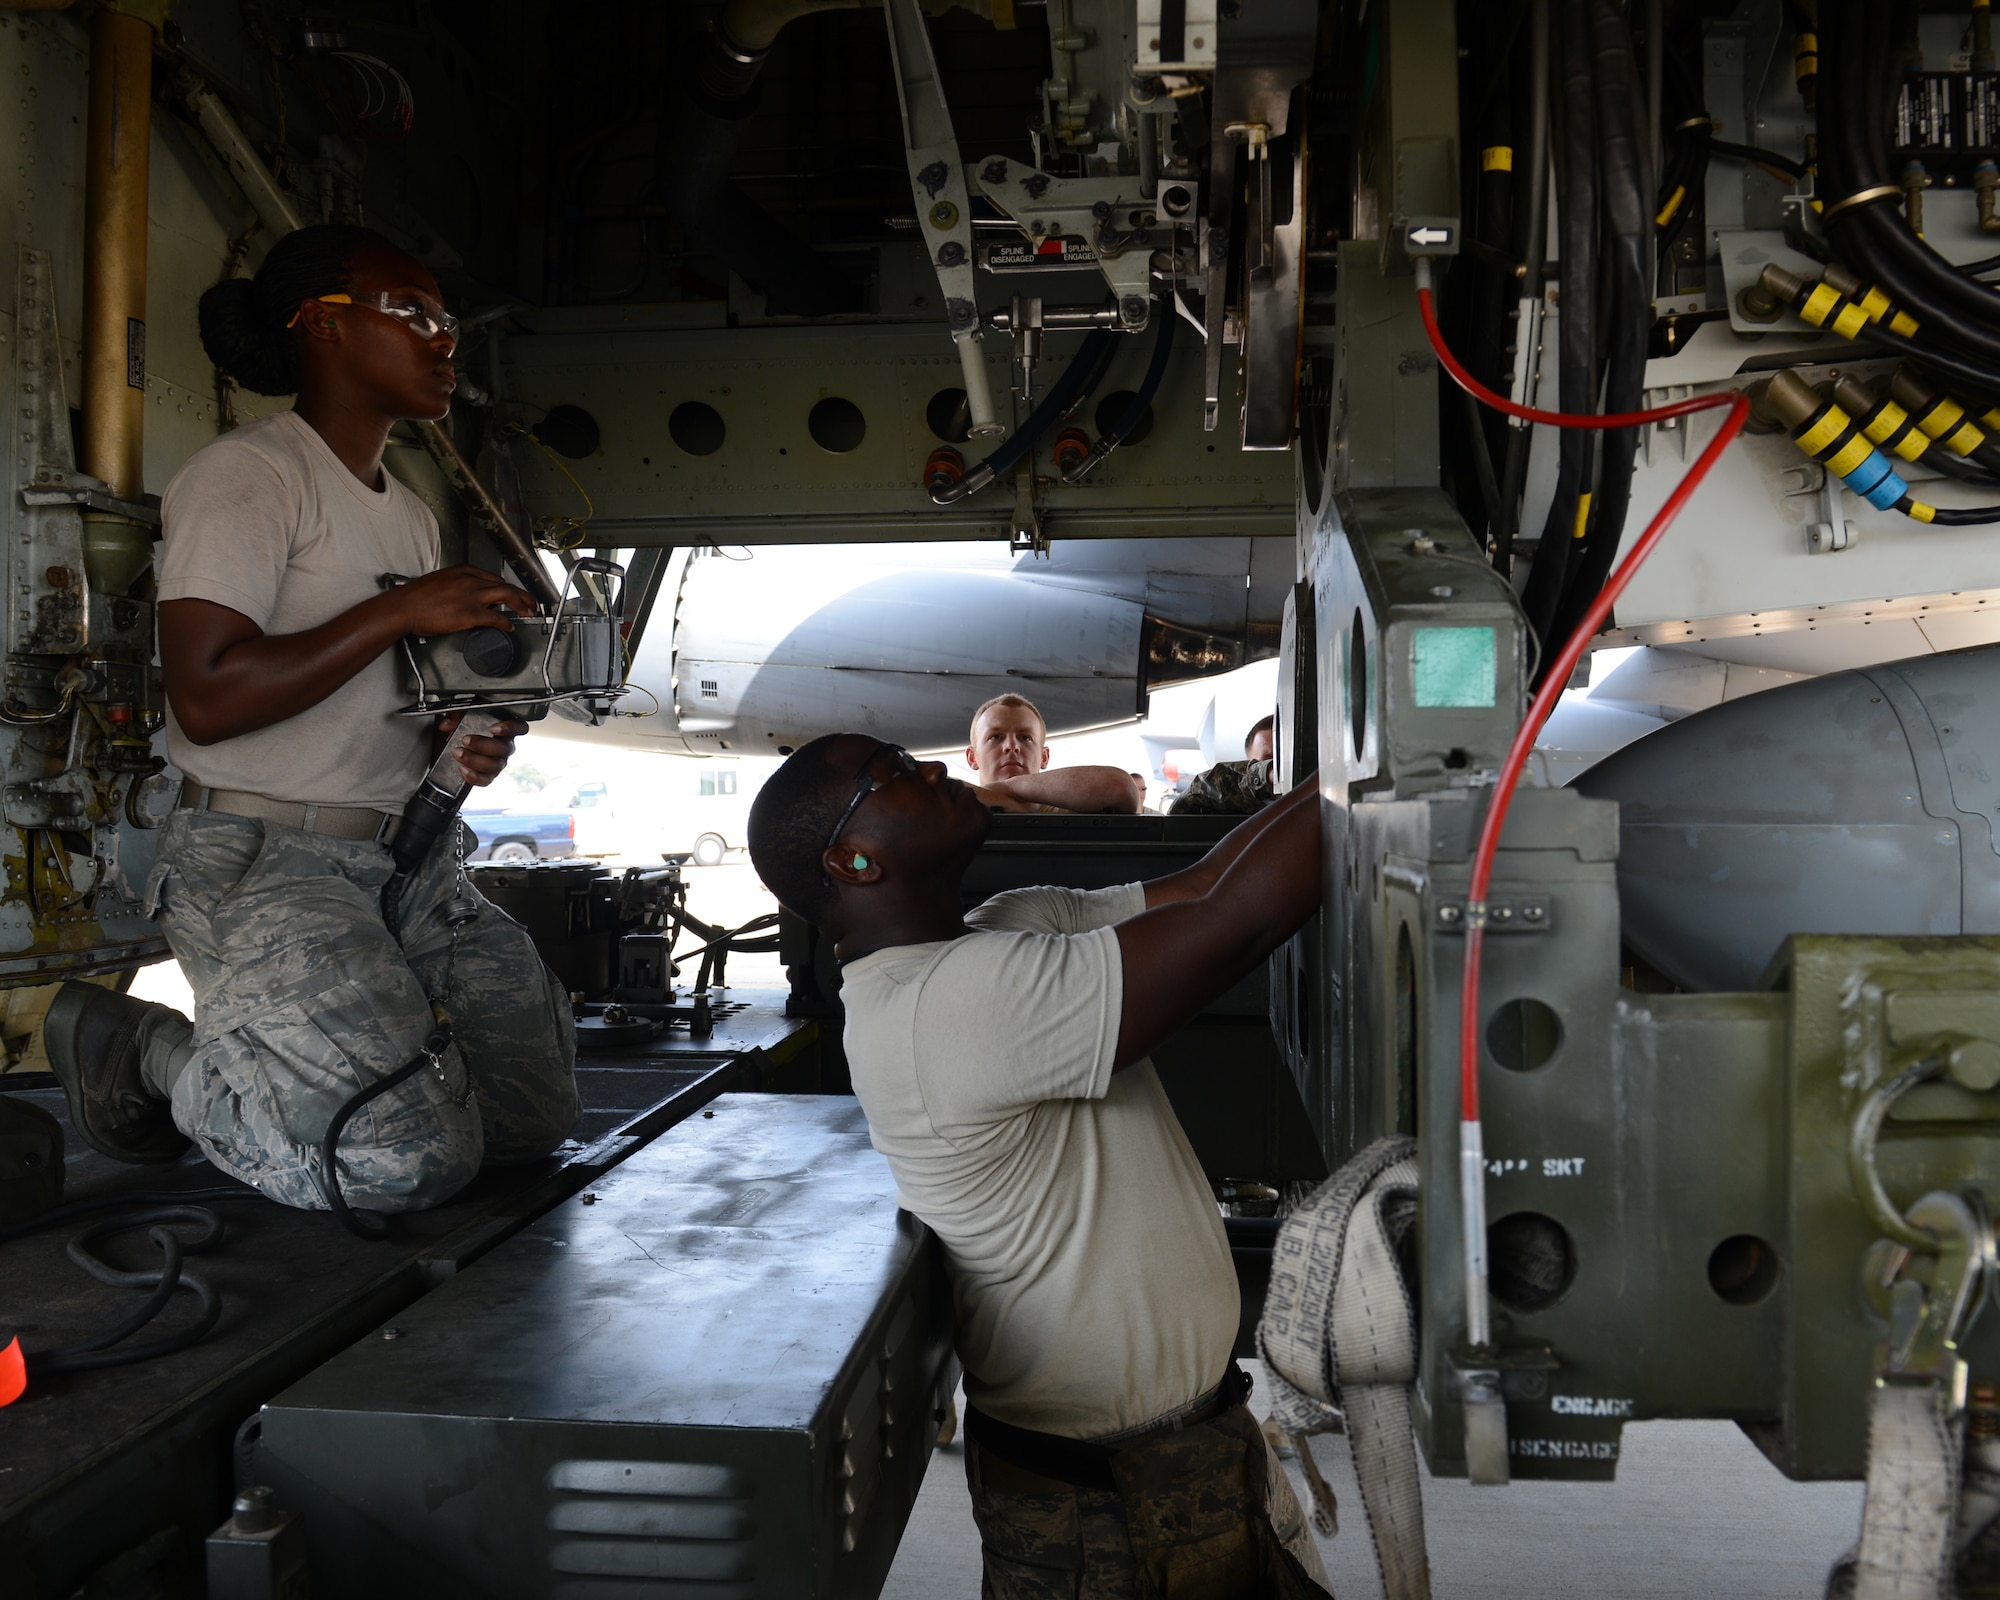 Senior Airman Breyana Anderson, left, and Staff Sgt. Raymond Edgerson, position an unarmed AGM-86B Air-Launched Cruise Missile for loading into the bomb bay of a B-52H Stratofortress Sept. 17, 2014, at Barksdale Air Force Base, La. The weapon was flown and released Sept. 22, as part of the Nuclear Weapons System Evaluation Program – an end-to-end operational evaluation of 8th Air Force and Task Force 204’s ability to deliver an ALCM from storage to its final target. (U.S. Air Force photo/Senior Airman Benjamin Gonsier)